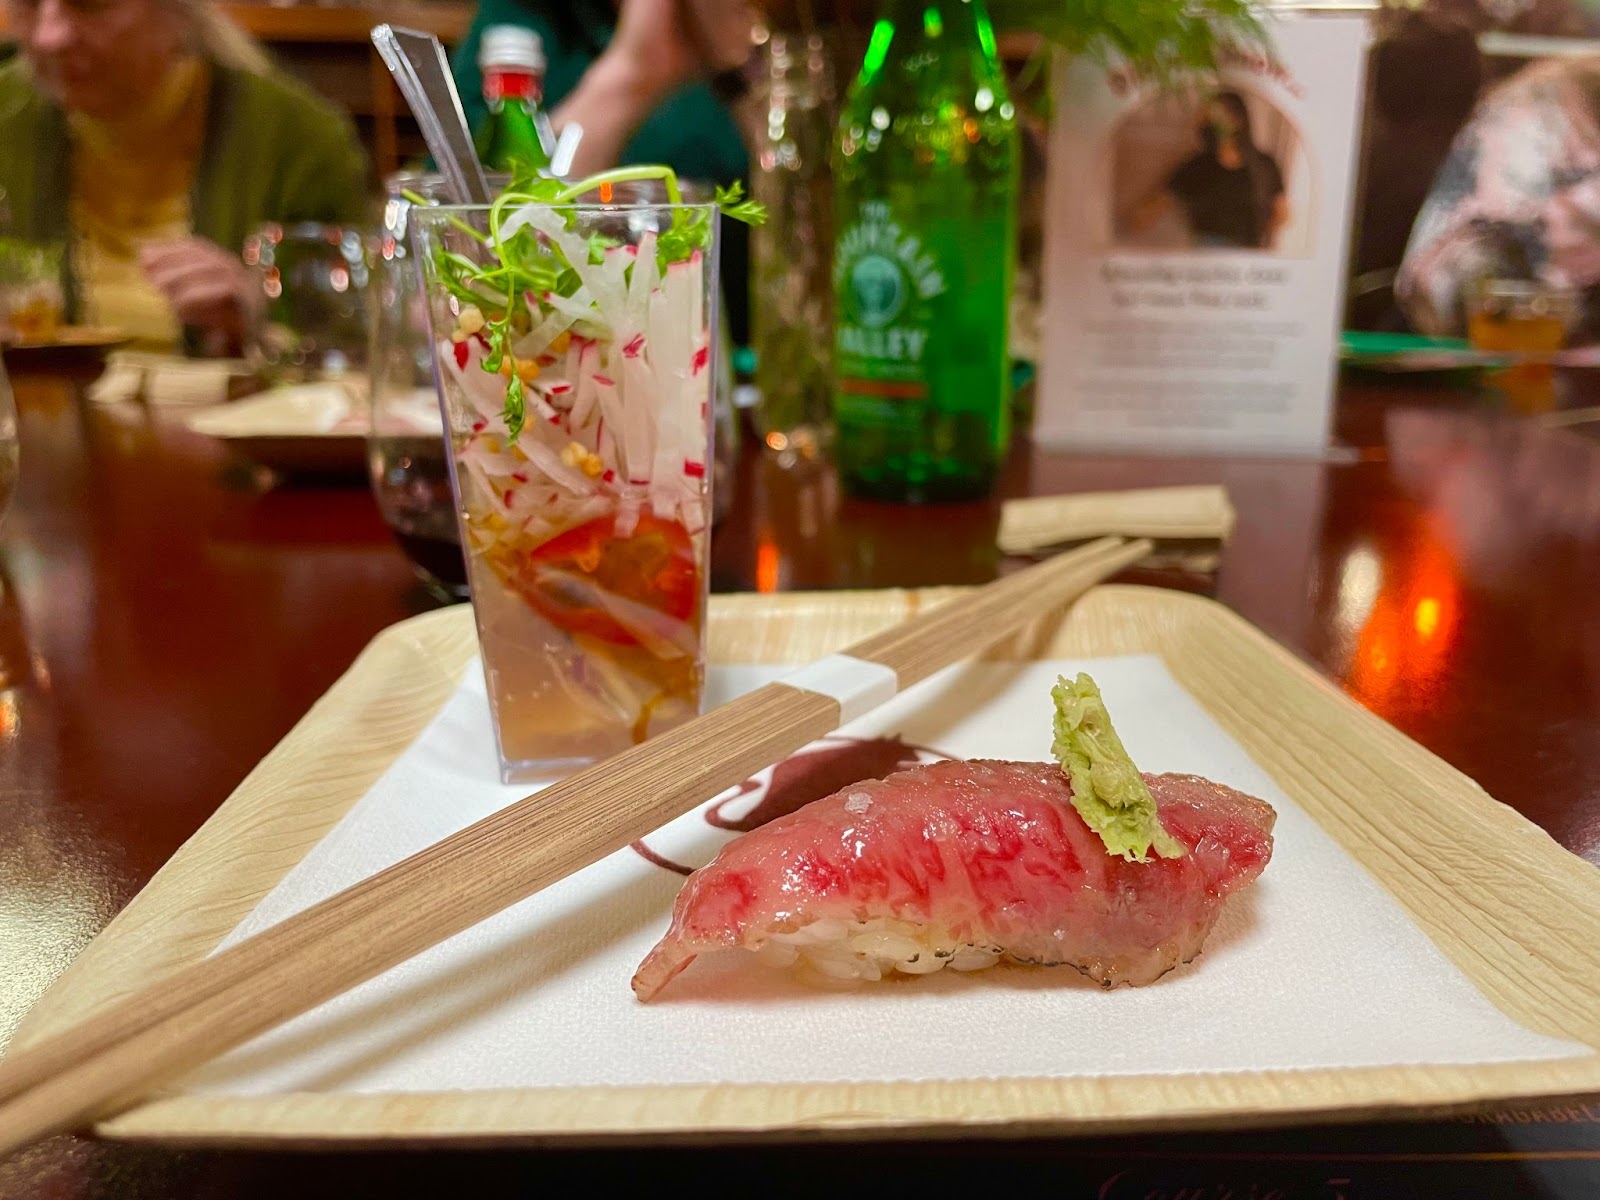 Surf and turf: a hamachi shooter and wagyu nigiri from Alexander's Steakhouse in Pasadena.